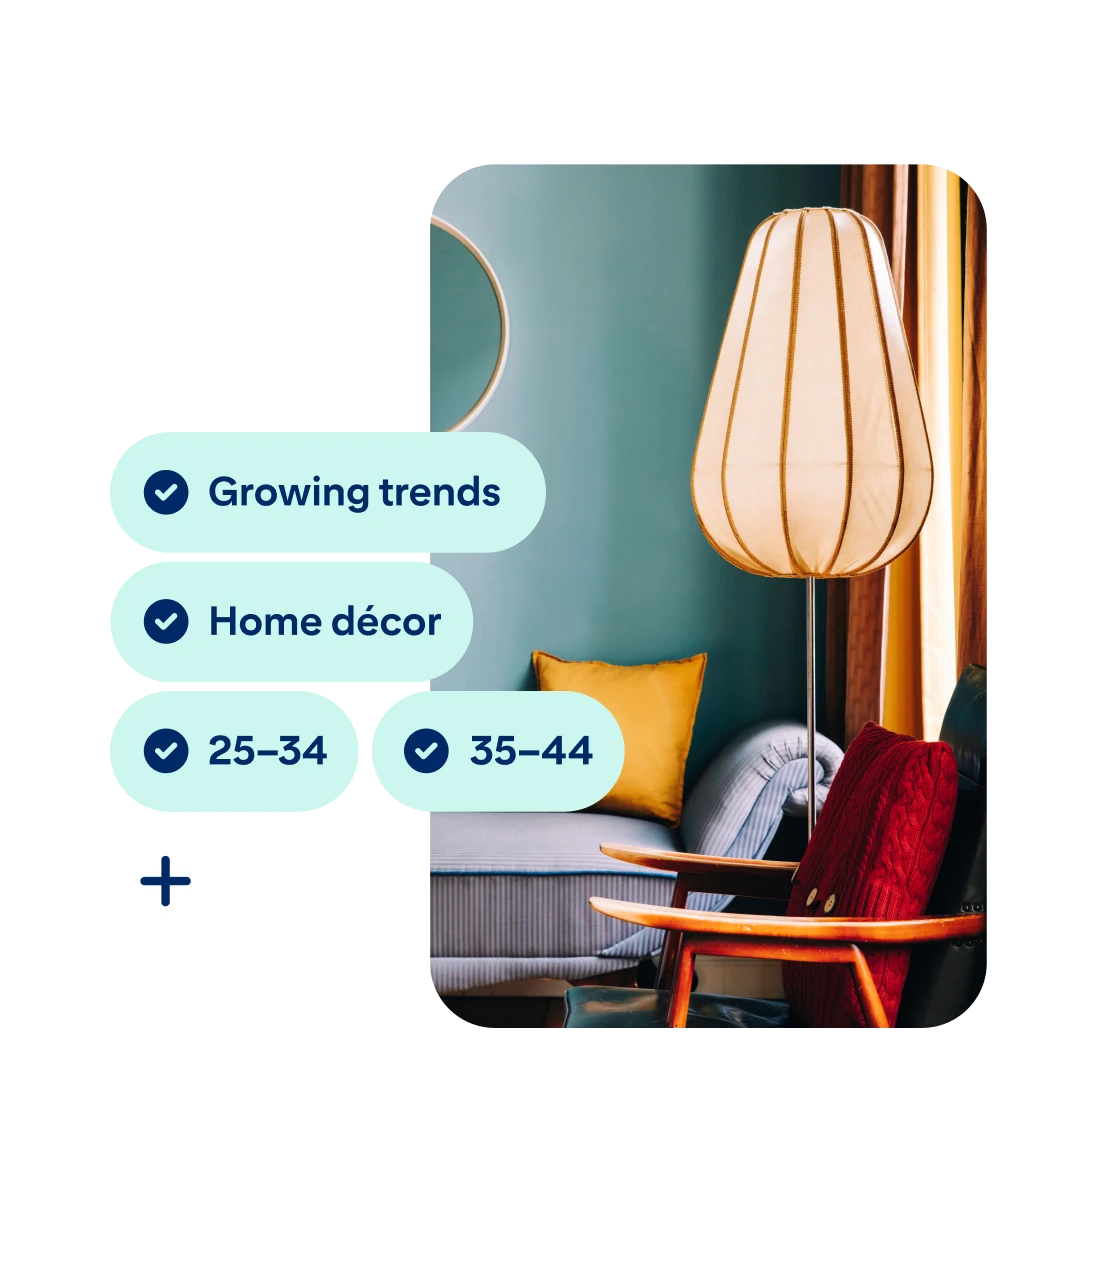 Pin of a cosy corner featuring a lamp, armchair and sofa, tagged with data filters such as â€˜Growing trendsâ€™, â€˜Home dÃ©corâ€™, â€˜25â€“34â€™ and â€˜35â€“44â€™.